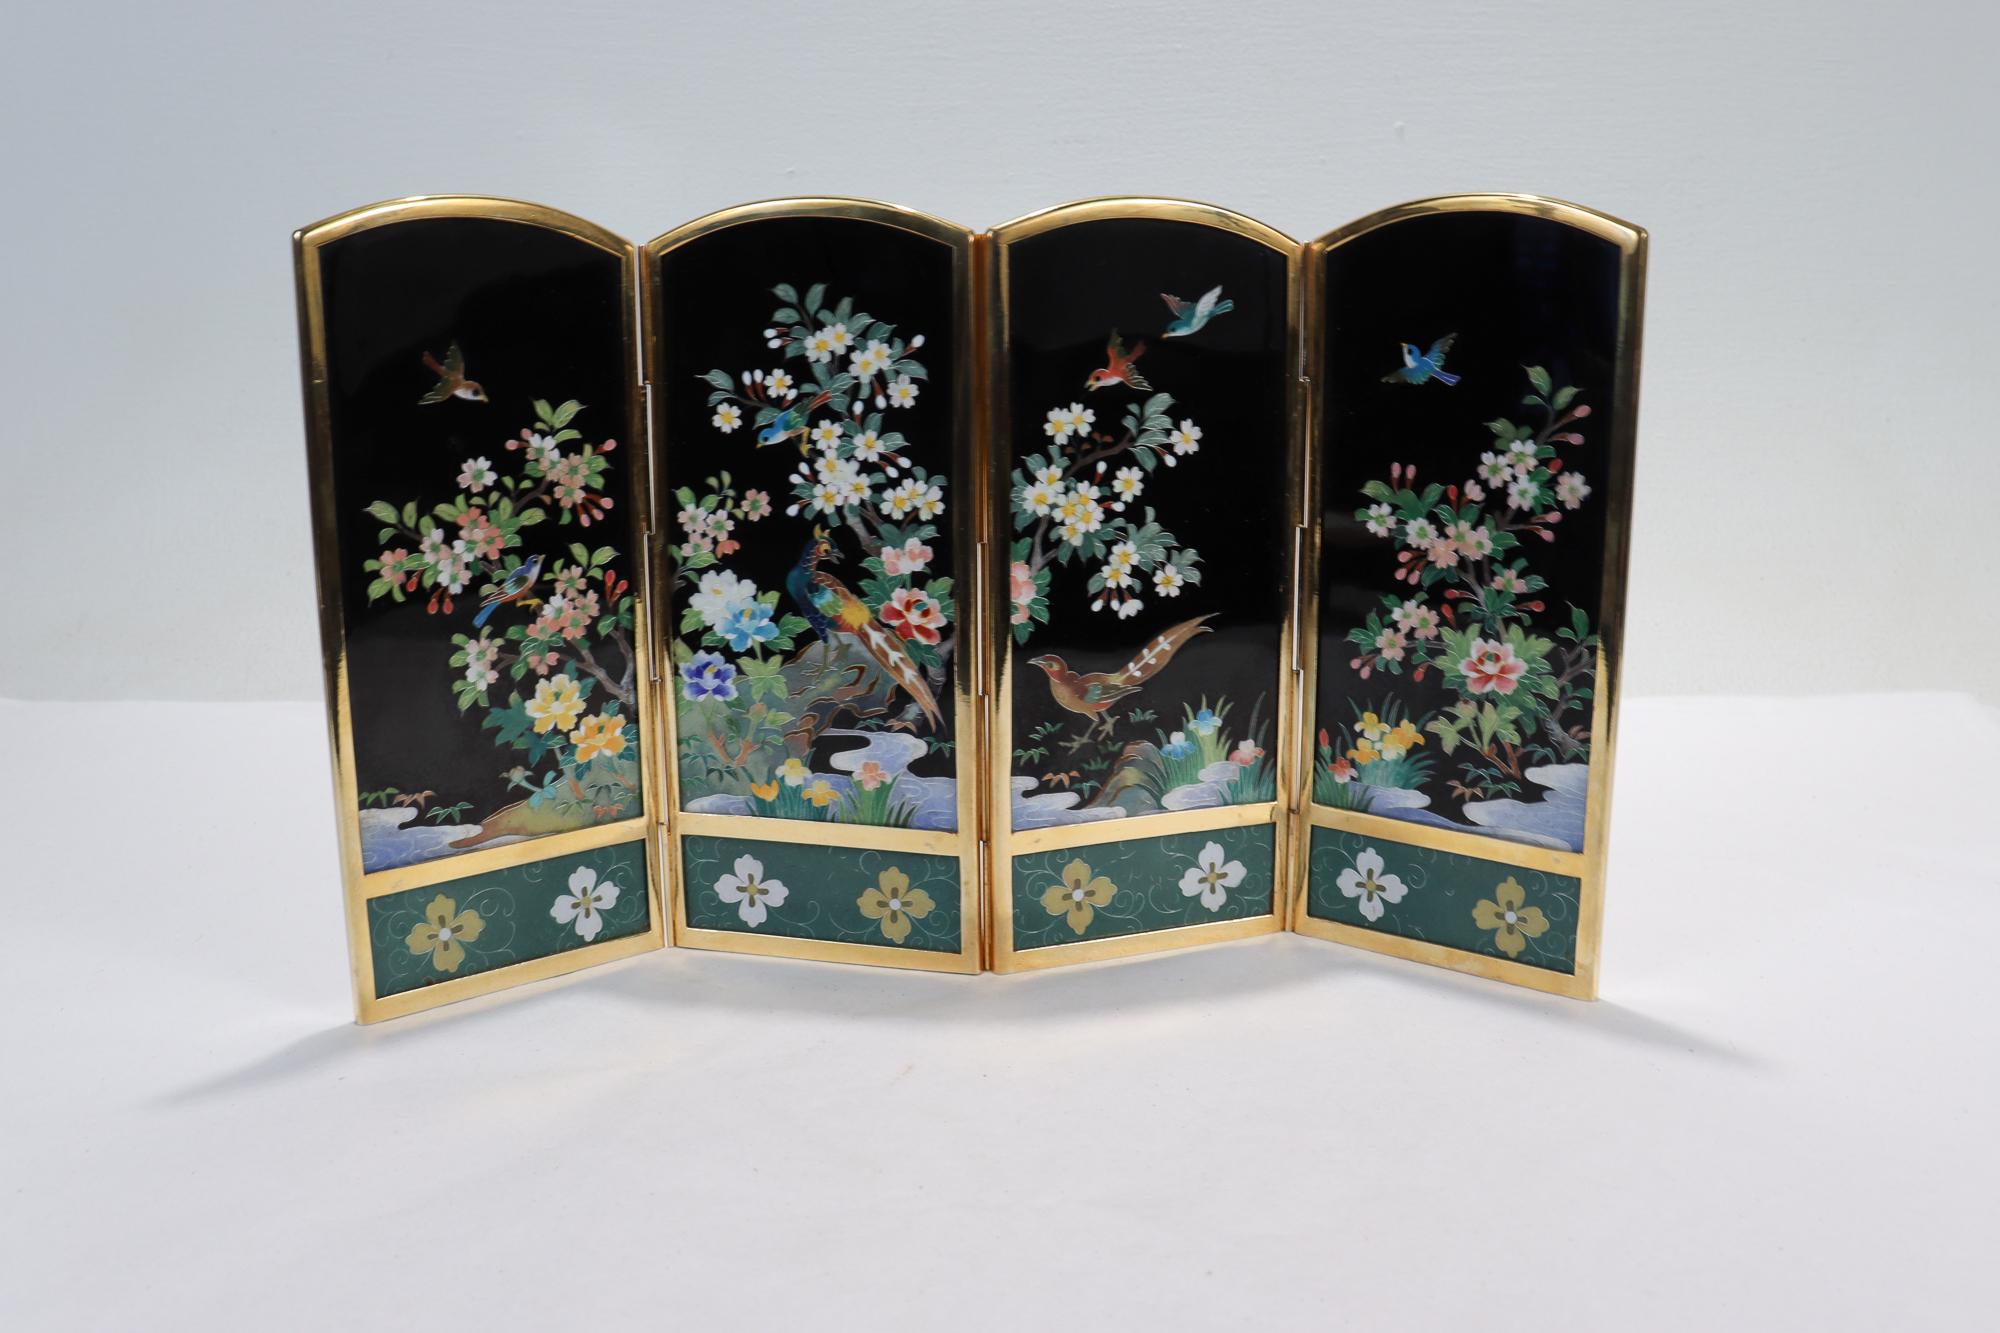 A fine Japanese table screen.

By the Inaba Cloisonne Company. 

One side has polychrome cloisonné enamel depictions of peacocks & other birds gathering among flowers & a stream. The other side is entirely silver plate and has engraved bamboo